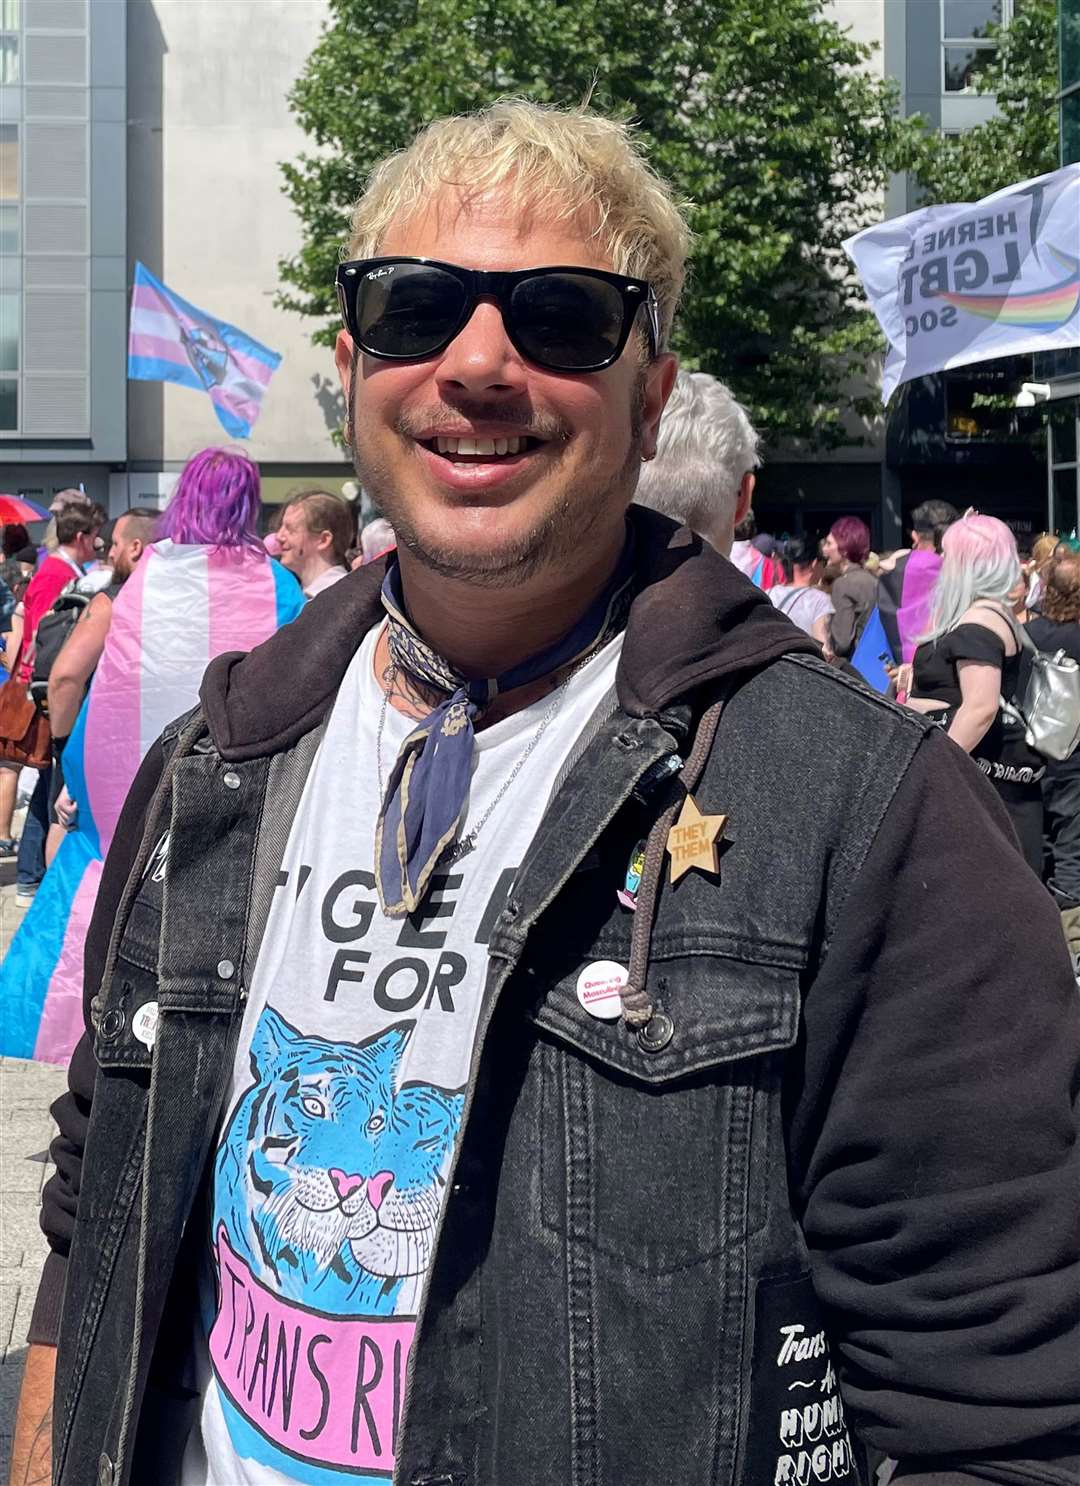 Co-founder of Trans Pride Brighton Fox Fisher takes part in the protest march in Brighton (PA)